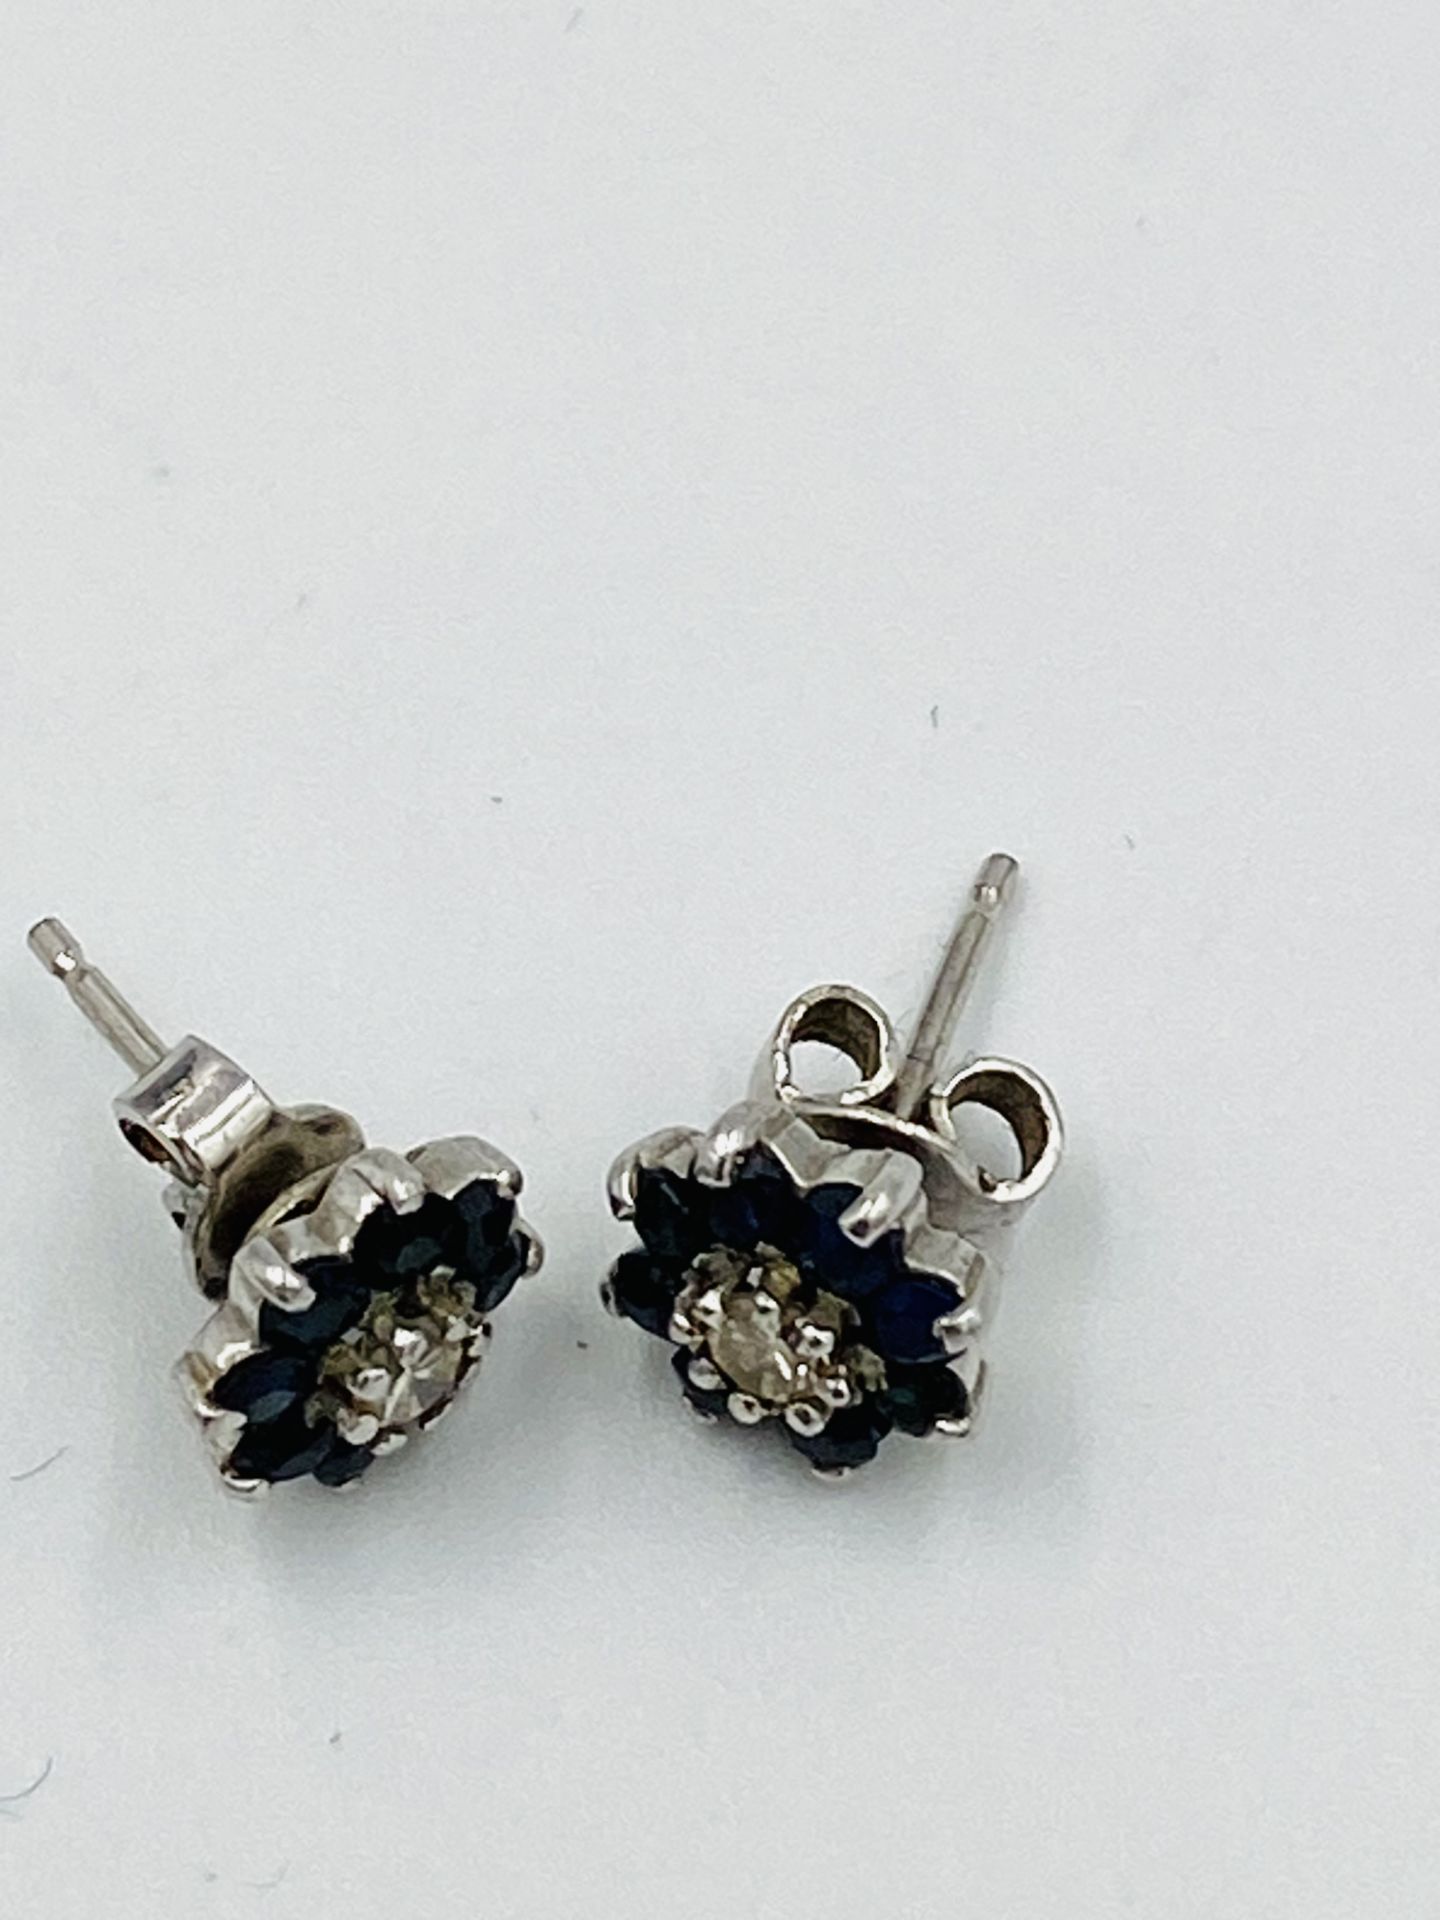 Pair of diamond and sapphire earrings - Image 2 of 3